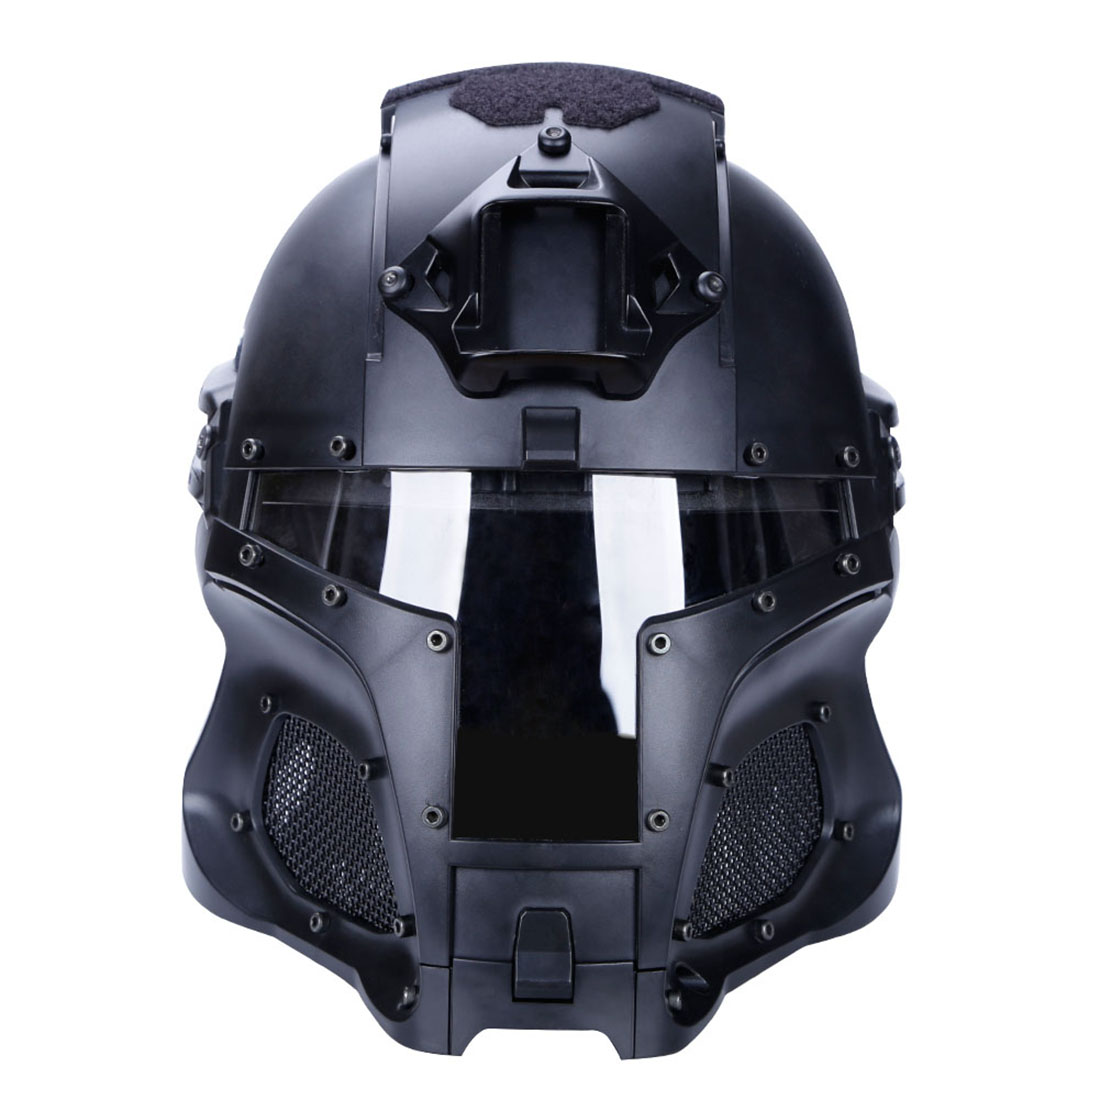 Details about   US Tactical Retro Medieval Iron Warrior Motorcycle Airsoft Helmet Mask Outdoor